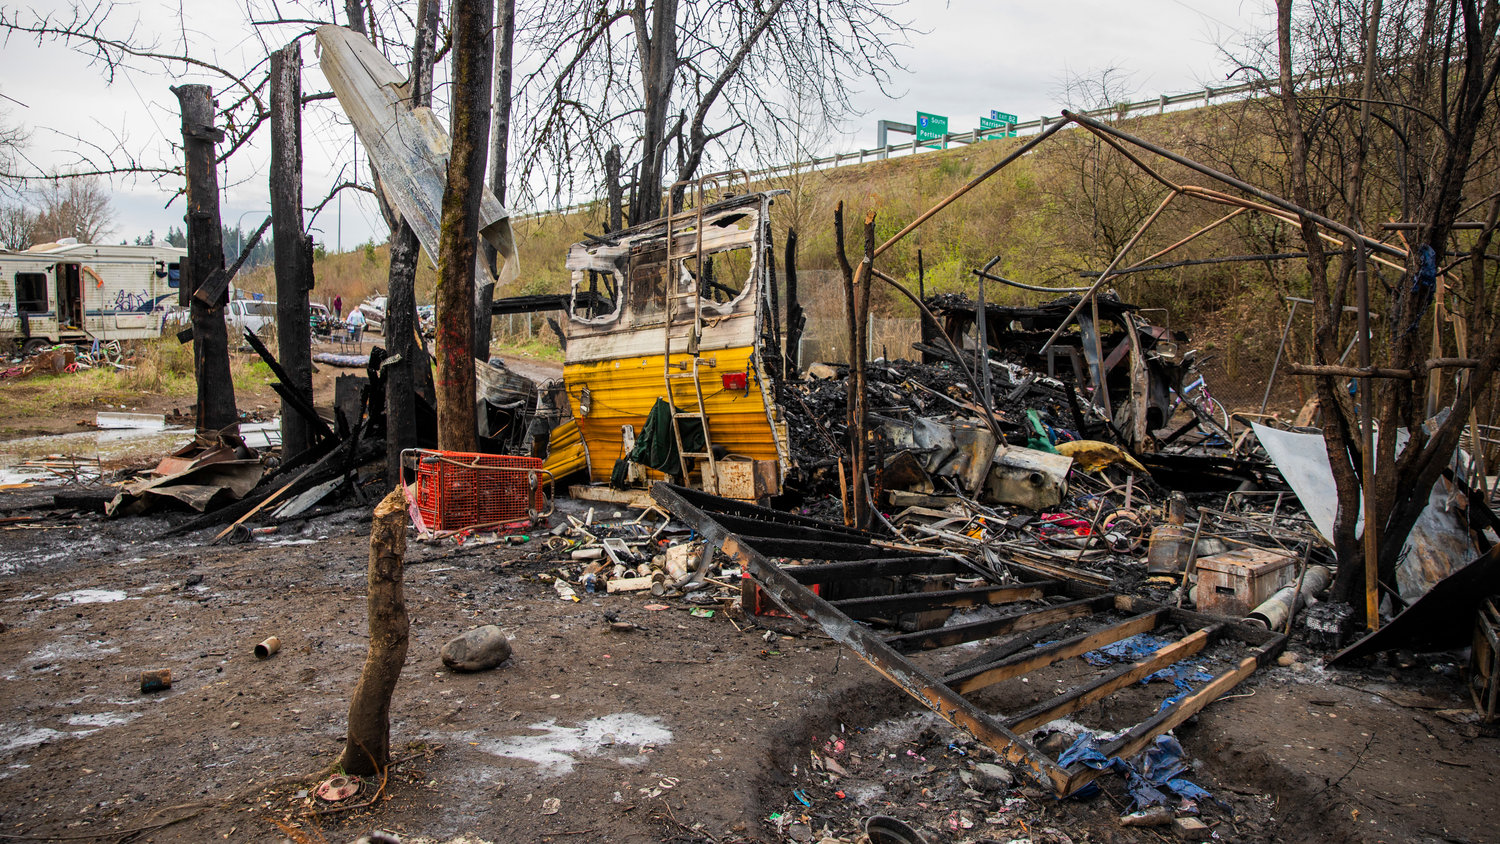 Charred debris are left Wednesday morning after a structure fire inside a homeless encampment near Blakeslee Junction on Tuesday, March 28, 2023.